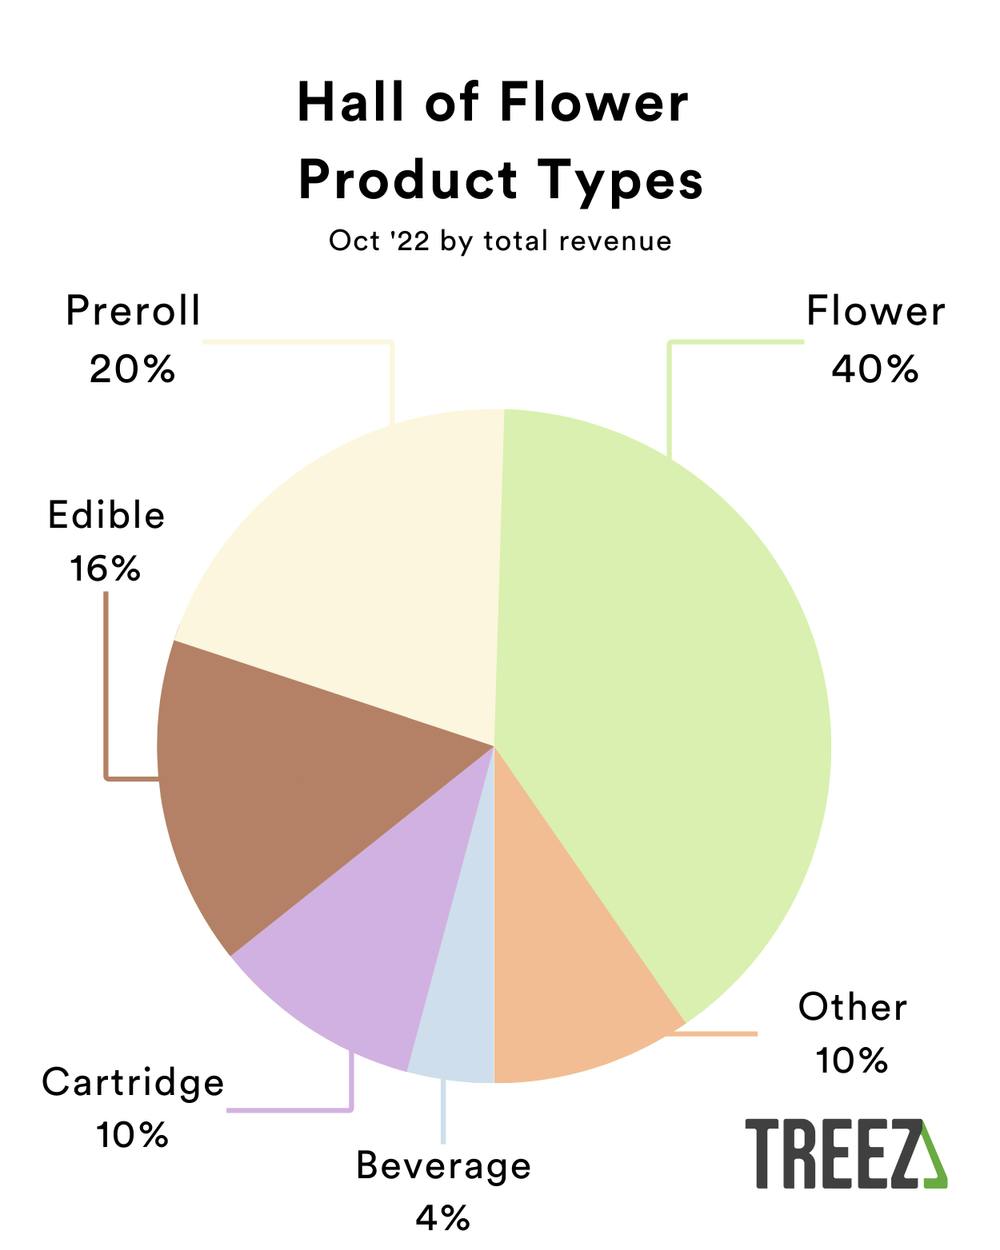 A pie chart shows the Hall of Flower Product Types by revenue - Flower has 40%, Preroll 20% and cartridge, edible and beverage are also represented